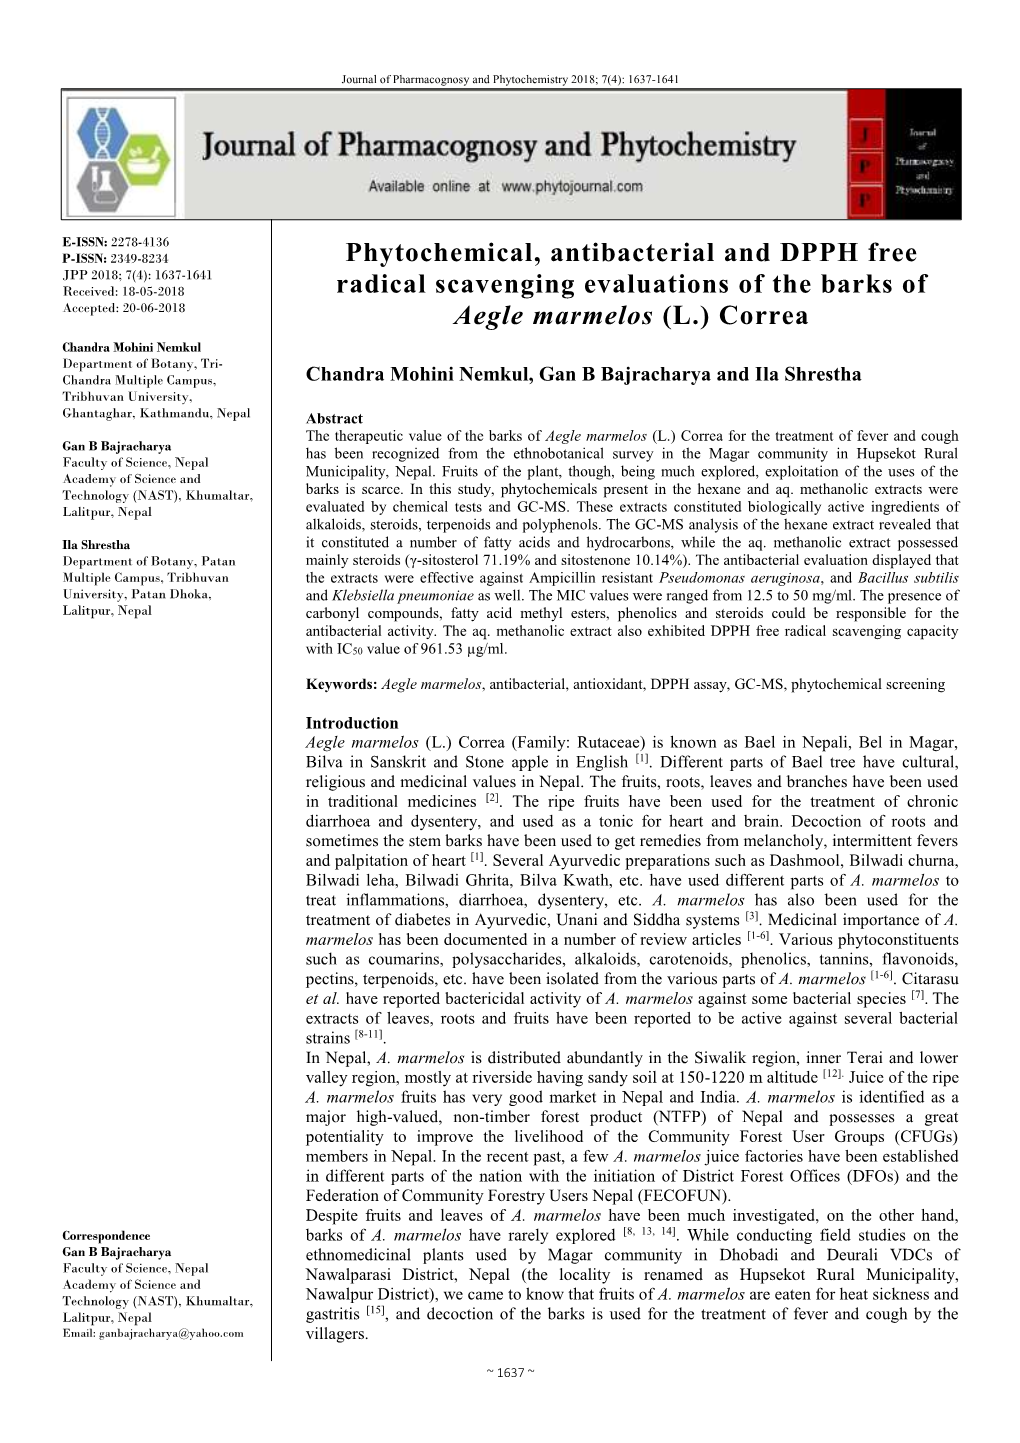 Phytochemical, Antibacterial and DPPH Free Radical Scavenging